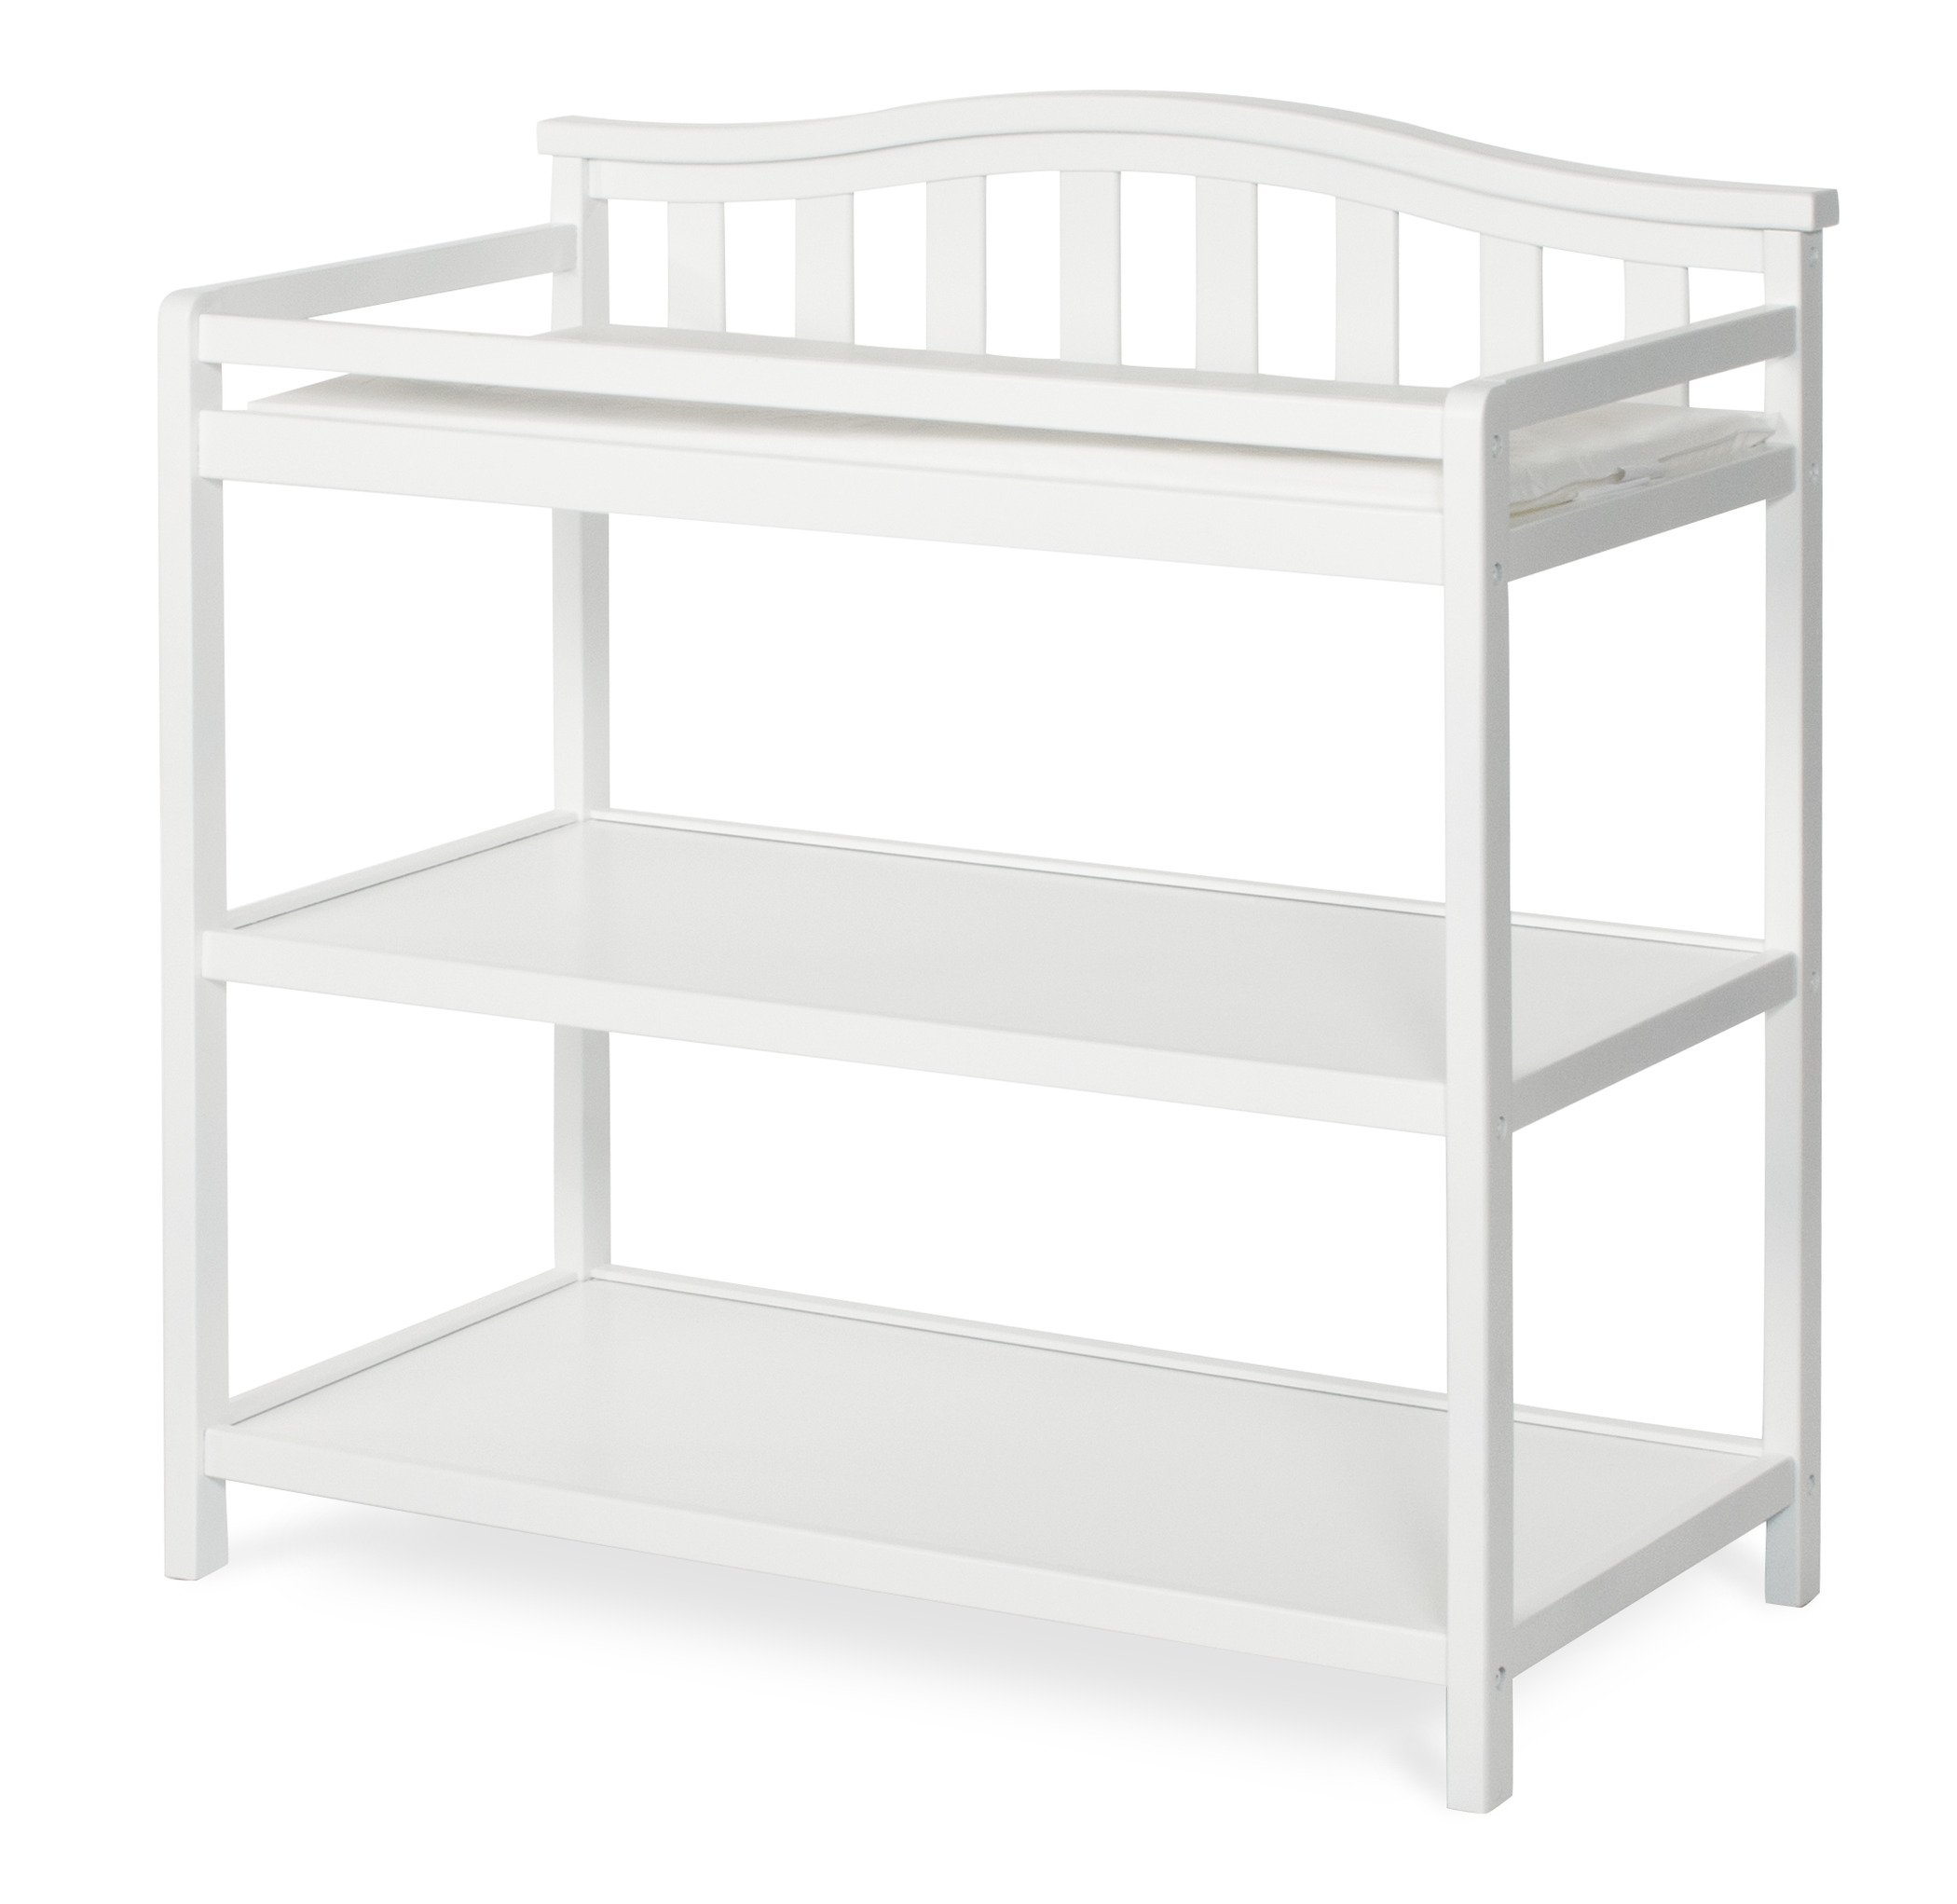 Foundations Child Craft Infant Changing Table with Arch Top Back, Water-Resistant Pad and Safety Strap, Matte White